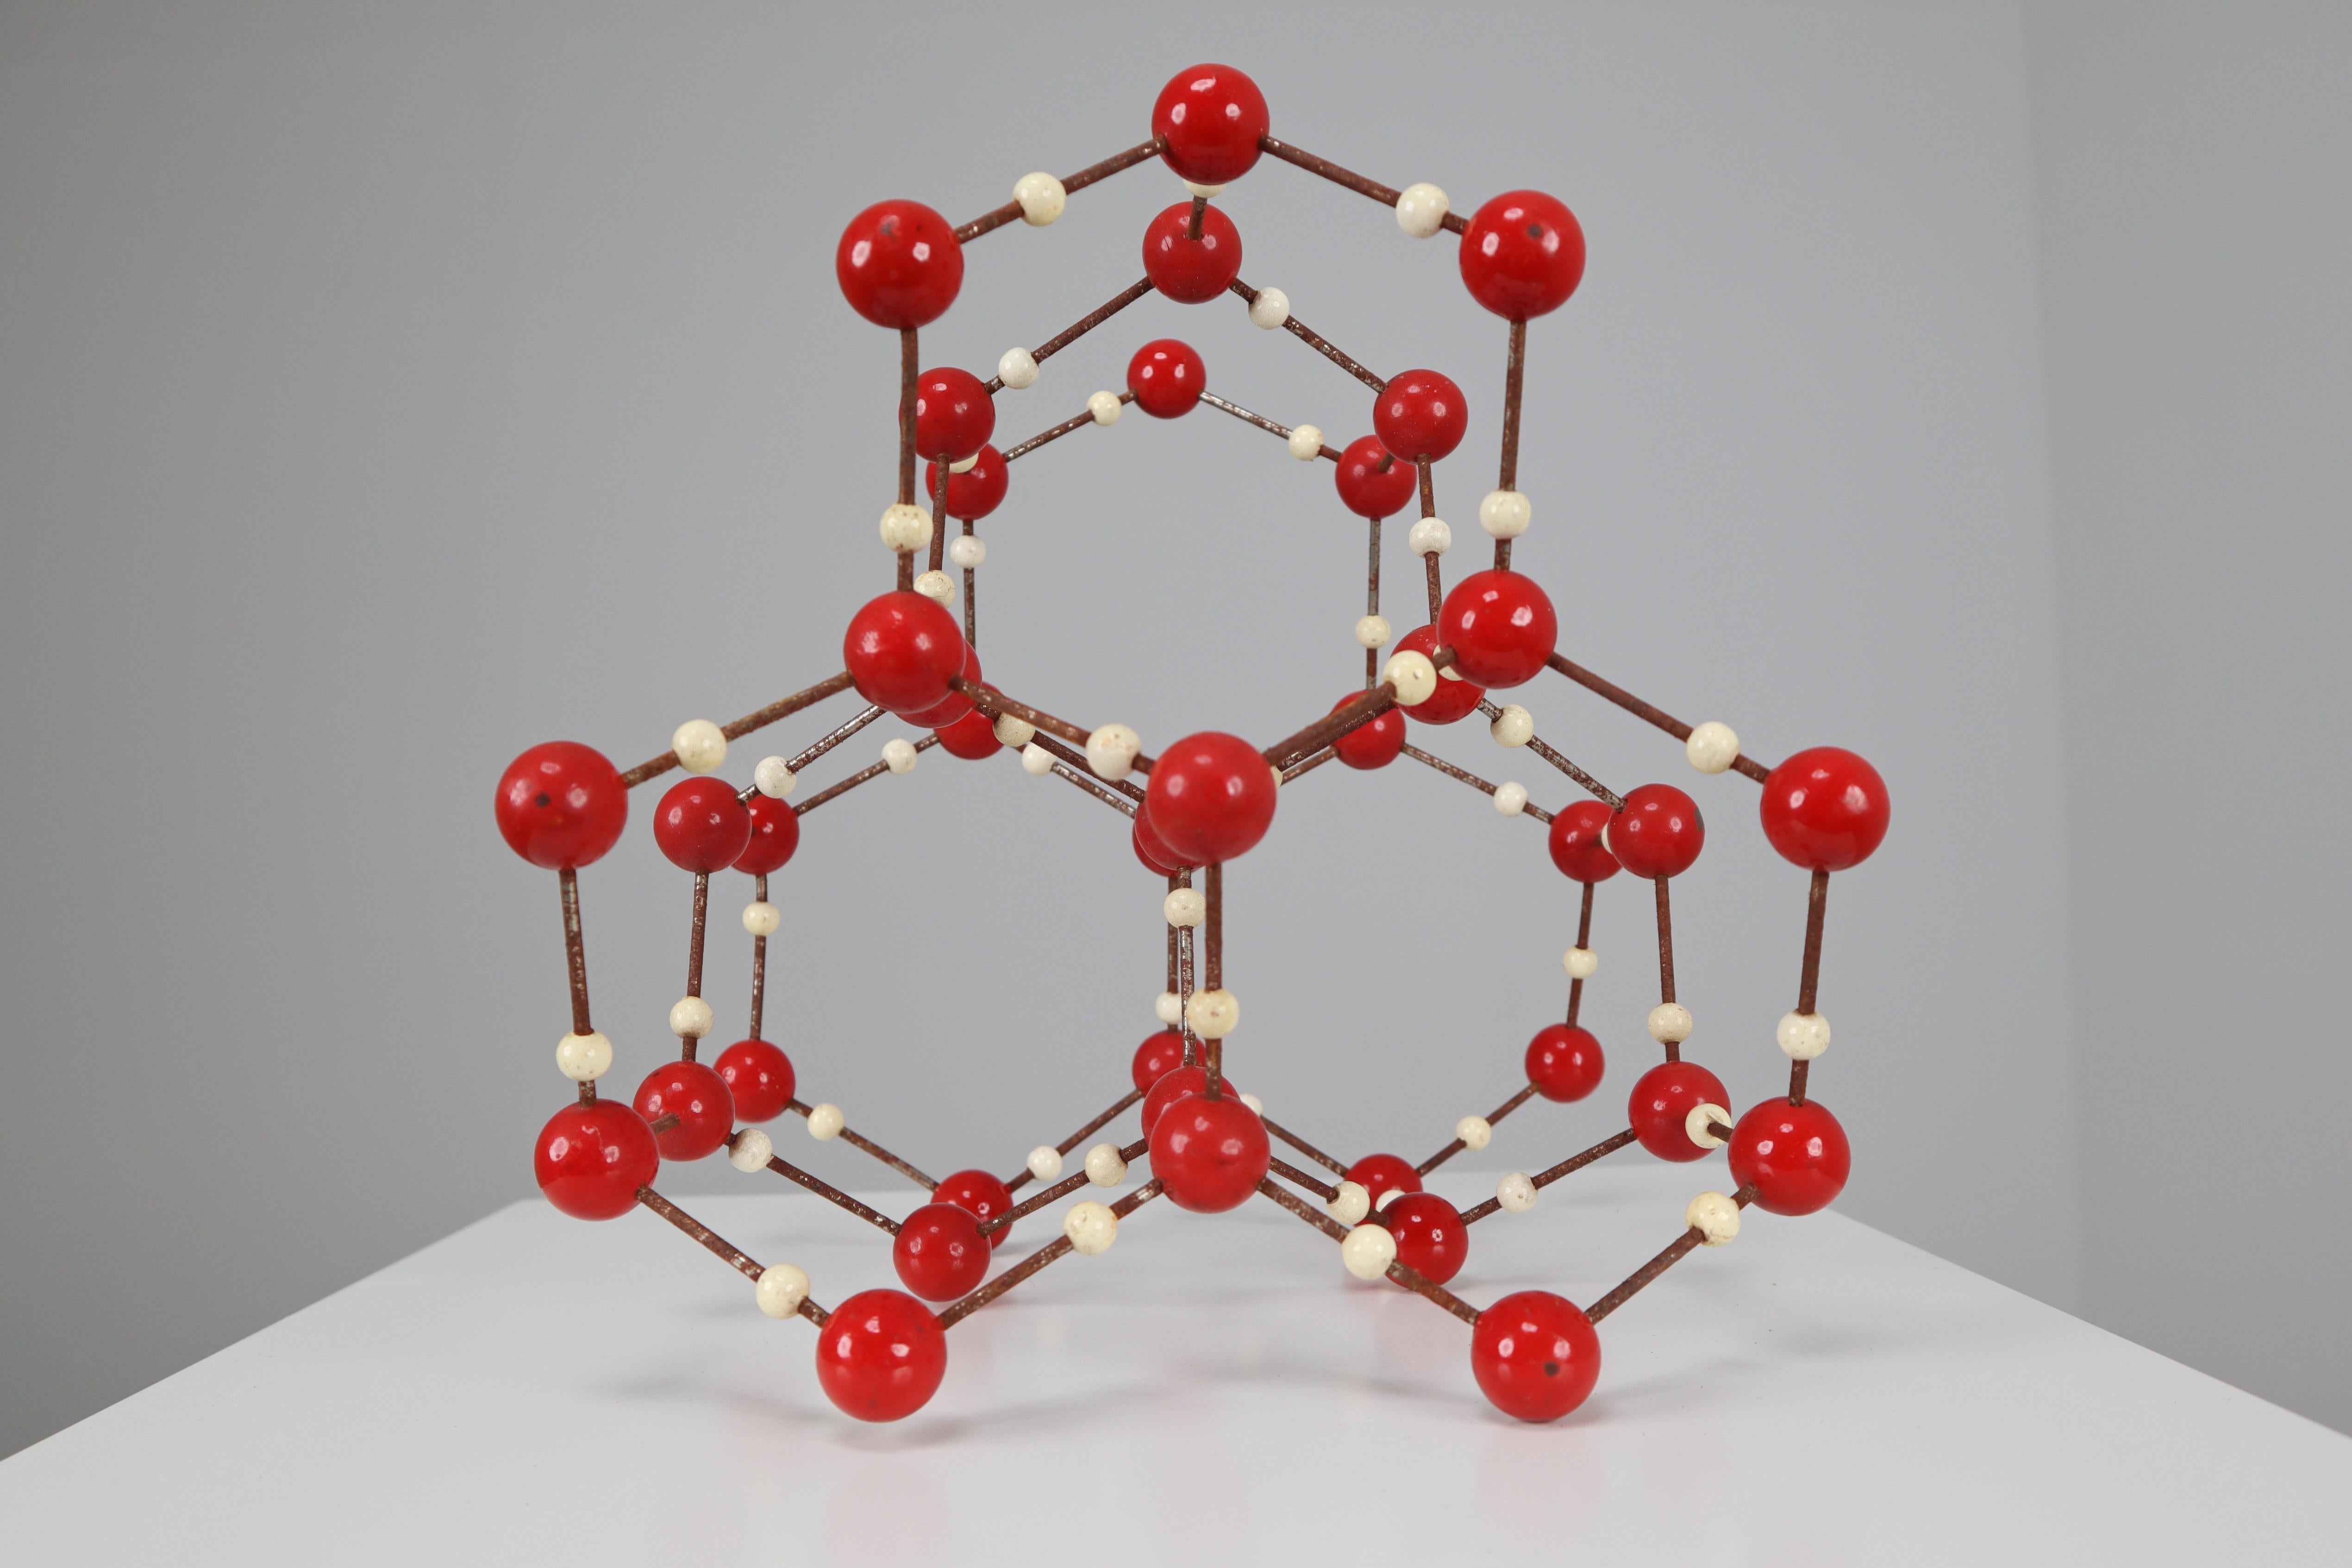 Midcentury molecular structure of water (H2O) for educational use, metal with wooden small spheres white painted, and with the larger spheres made of red painted bakelite. Czechoslovak manufacture of the 1950s. In good patinated condition. Measures